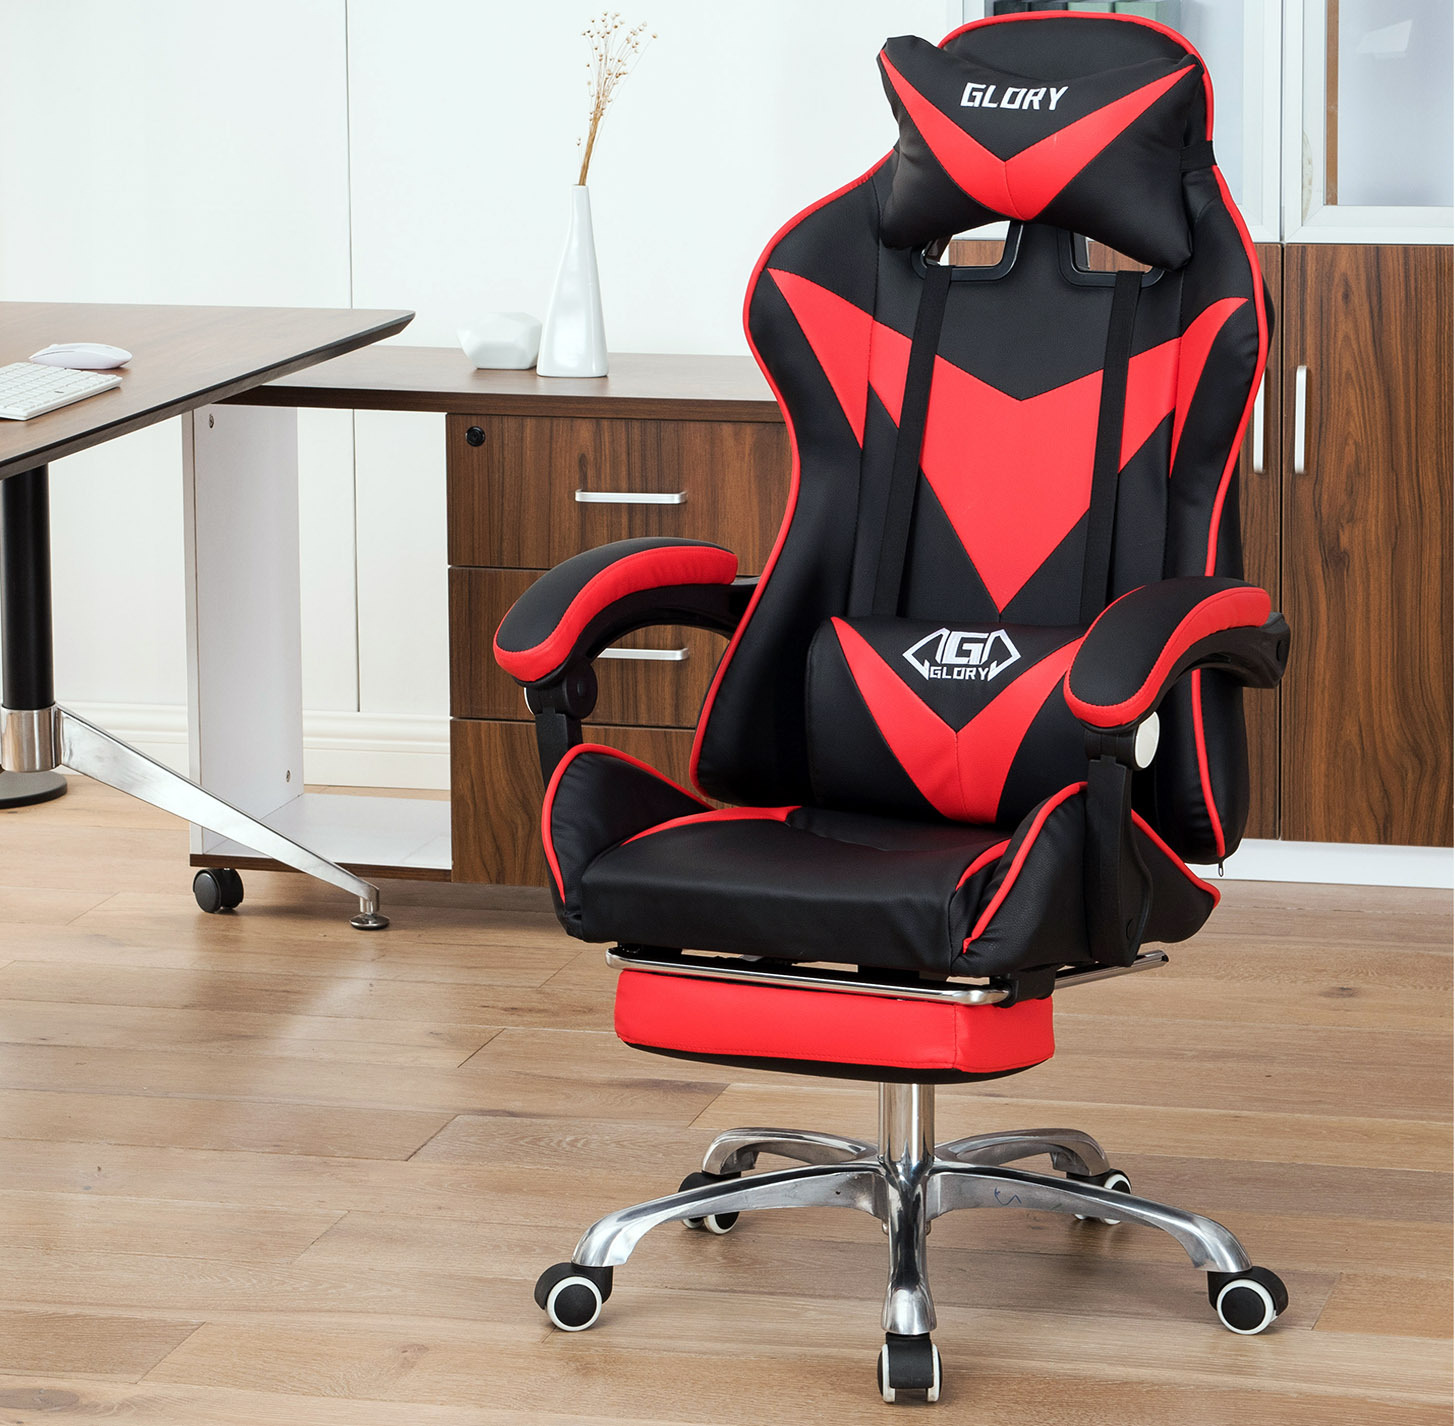 Advanced High Back Gaming Reclining Executive Office Chair